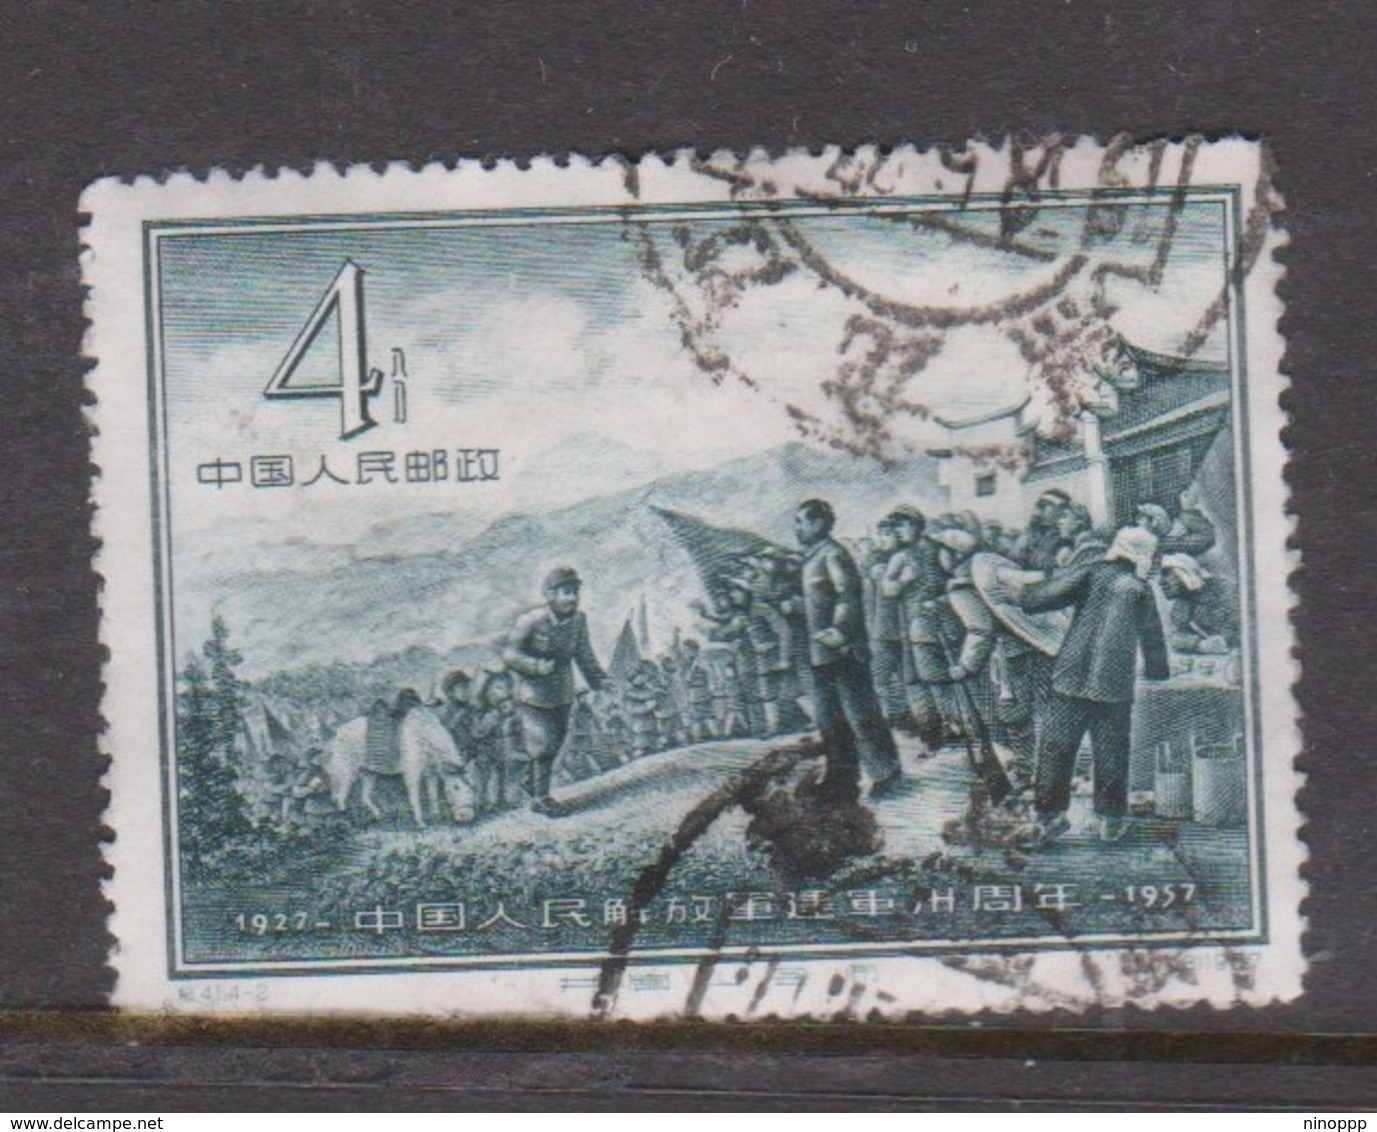 China People's Republic Scott 314 1957 Liberation Army,Nanchang Uprising,4f Slate Green,used - Used Stamps